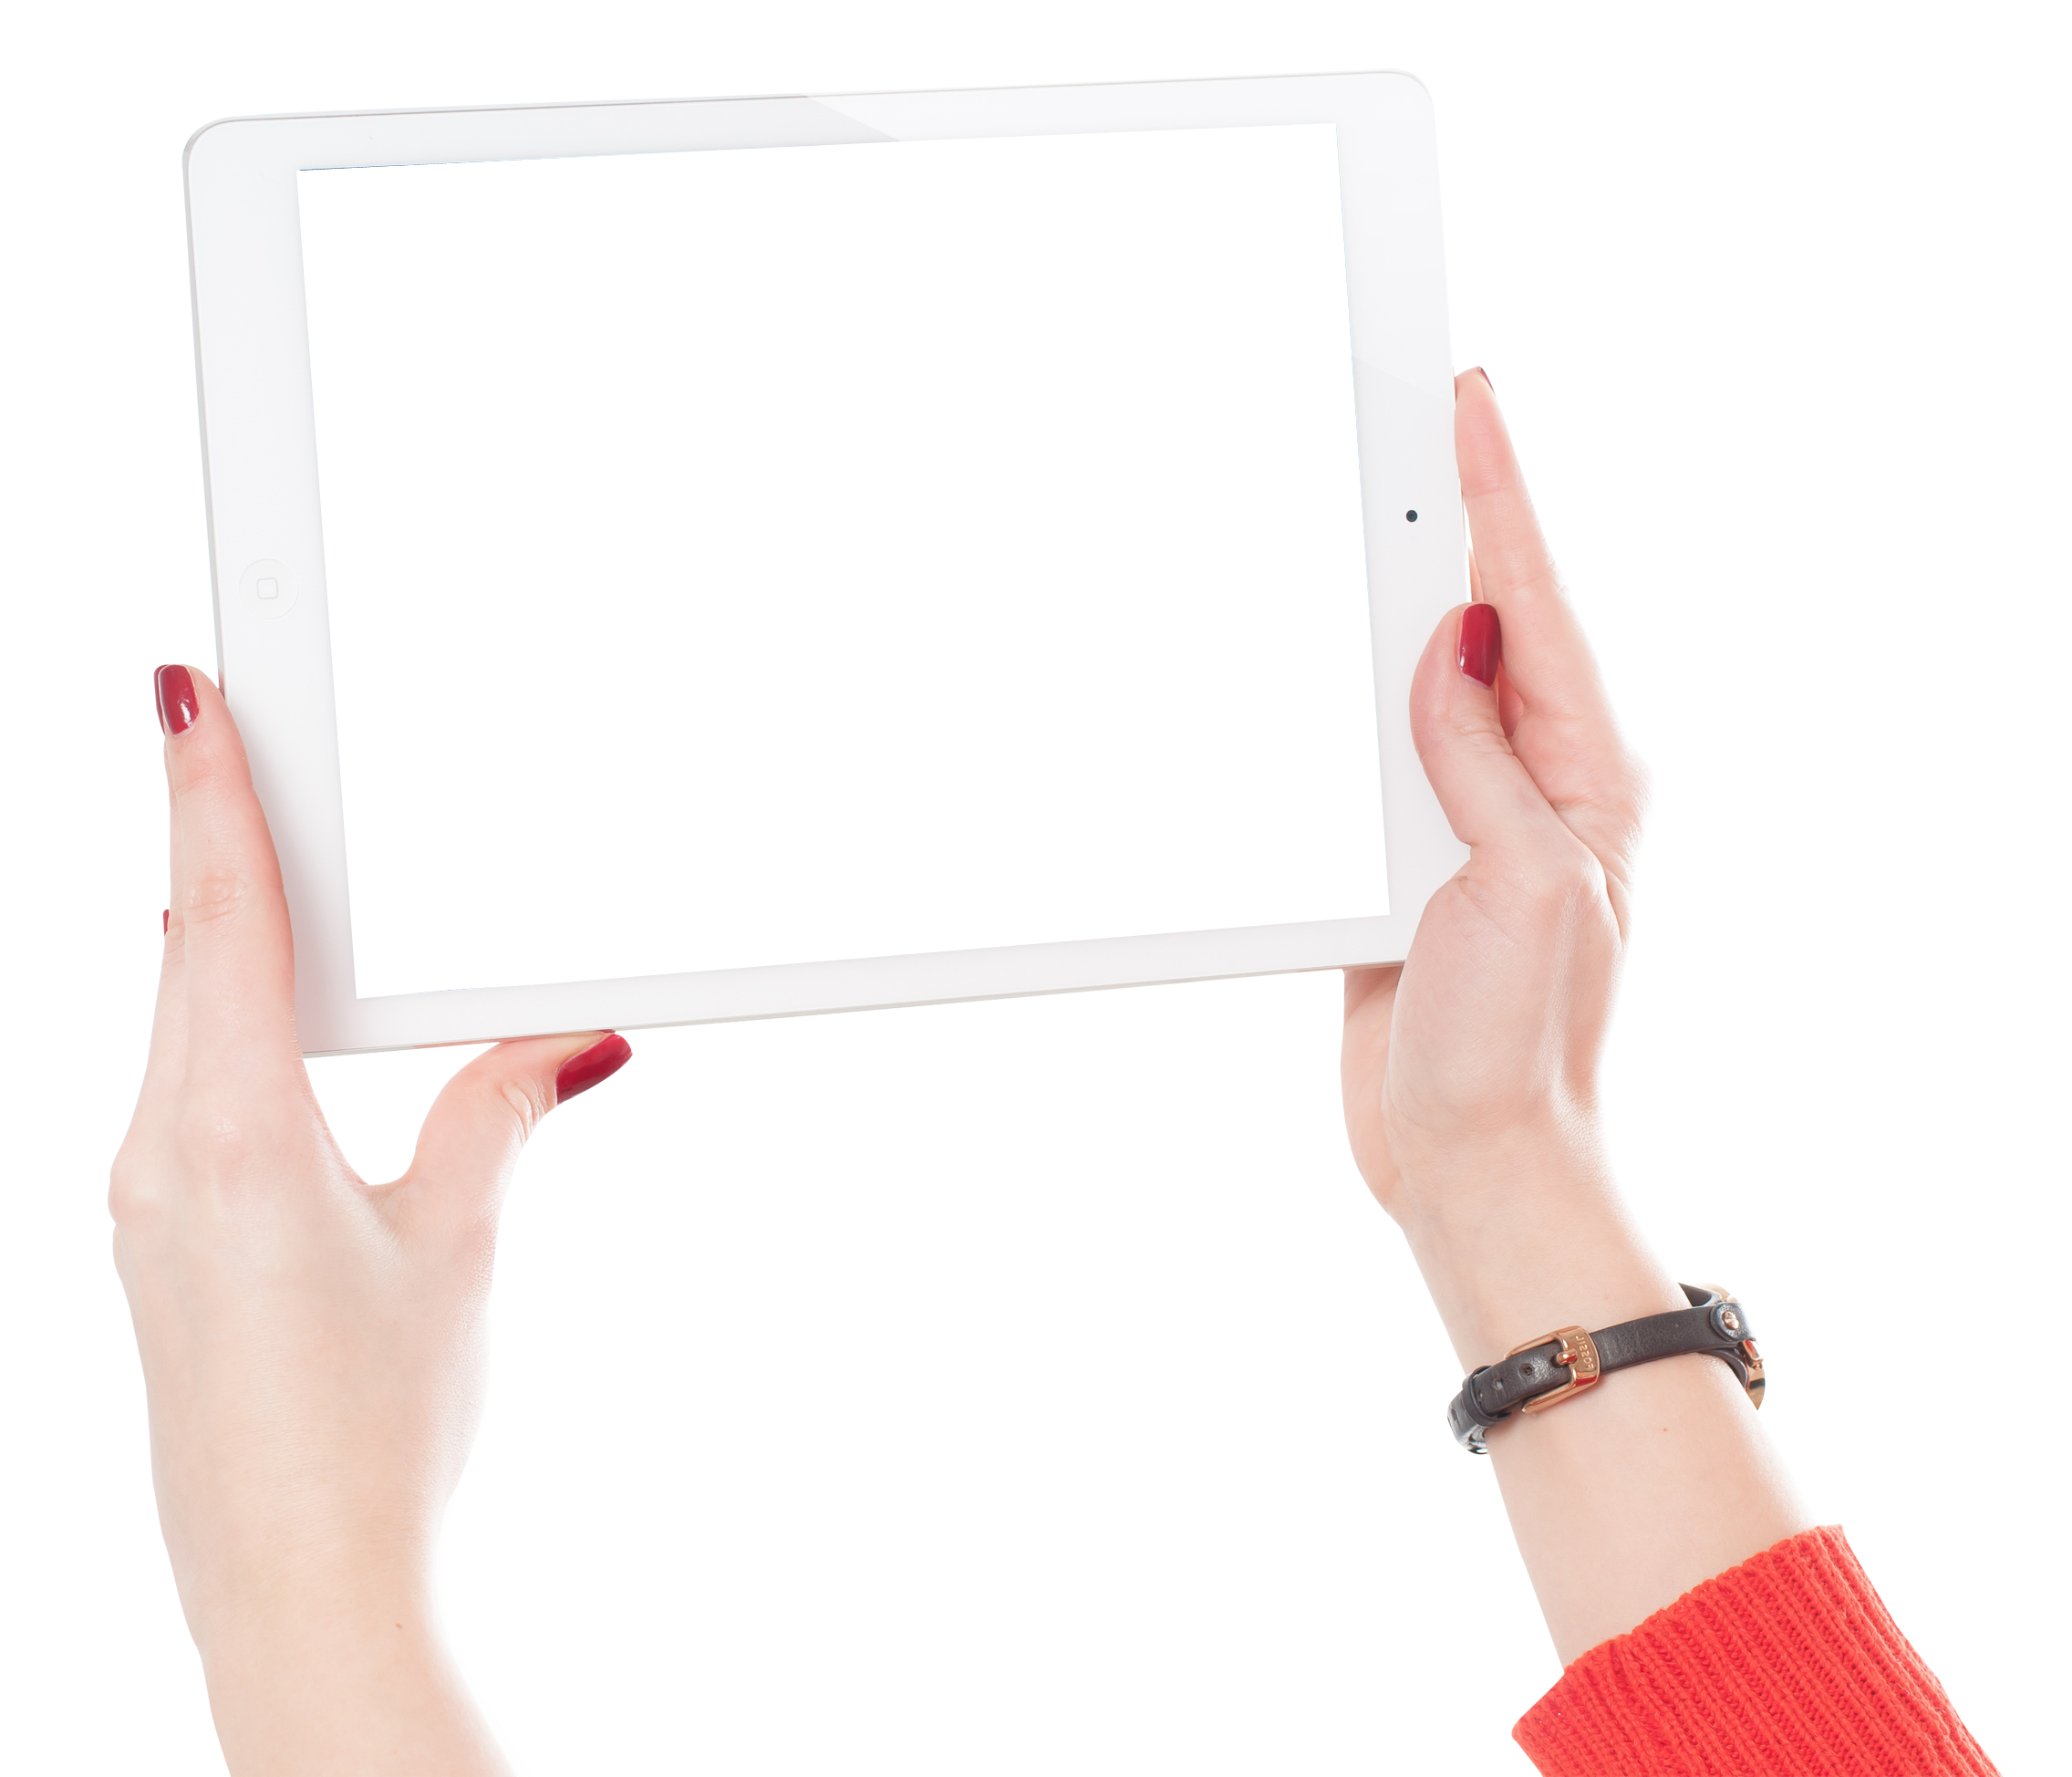 Woman Hands Holding iPad PNG Image